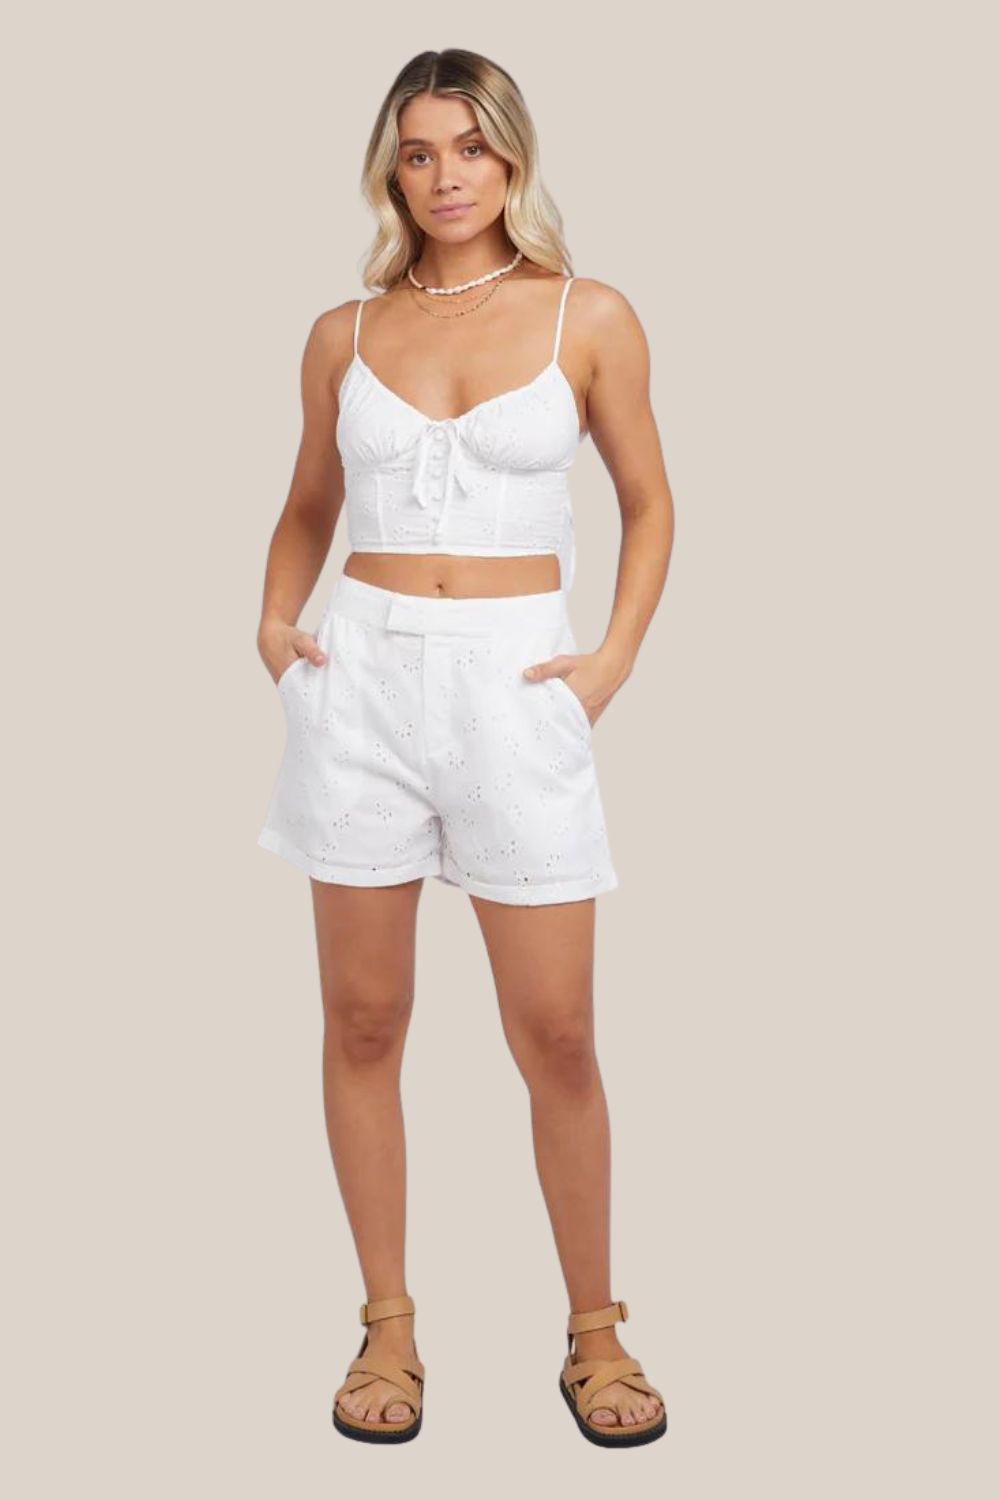 All About Eve Olivia Short